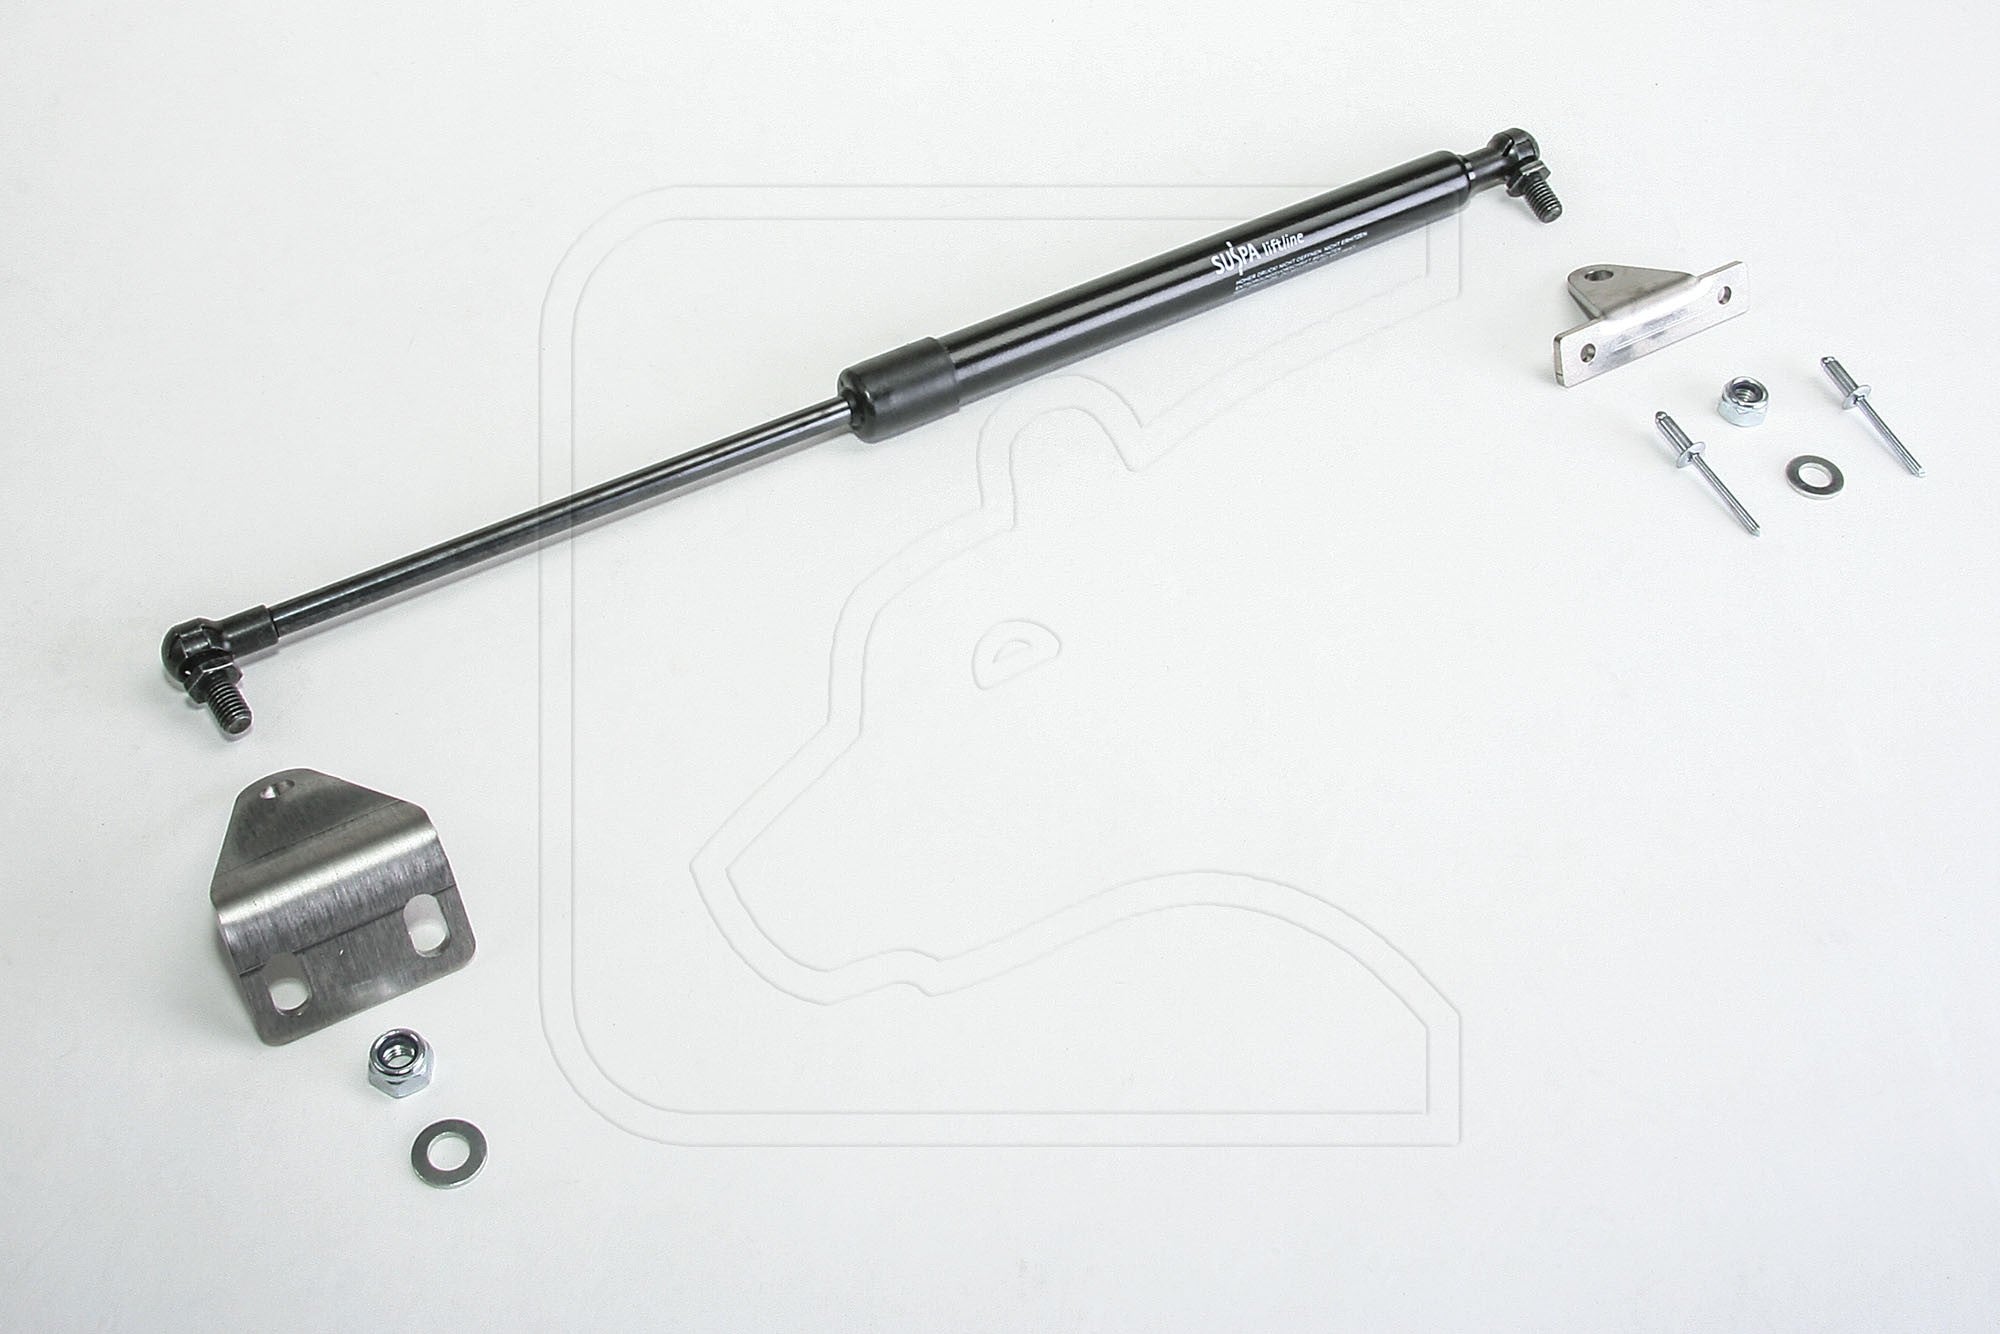 Defender Rear Station Wagon Door Gas Strut Conversion Kit (up to model year 2001) - Land Rover 90/110